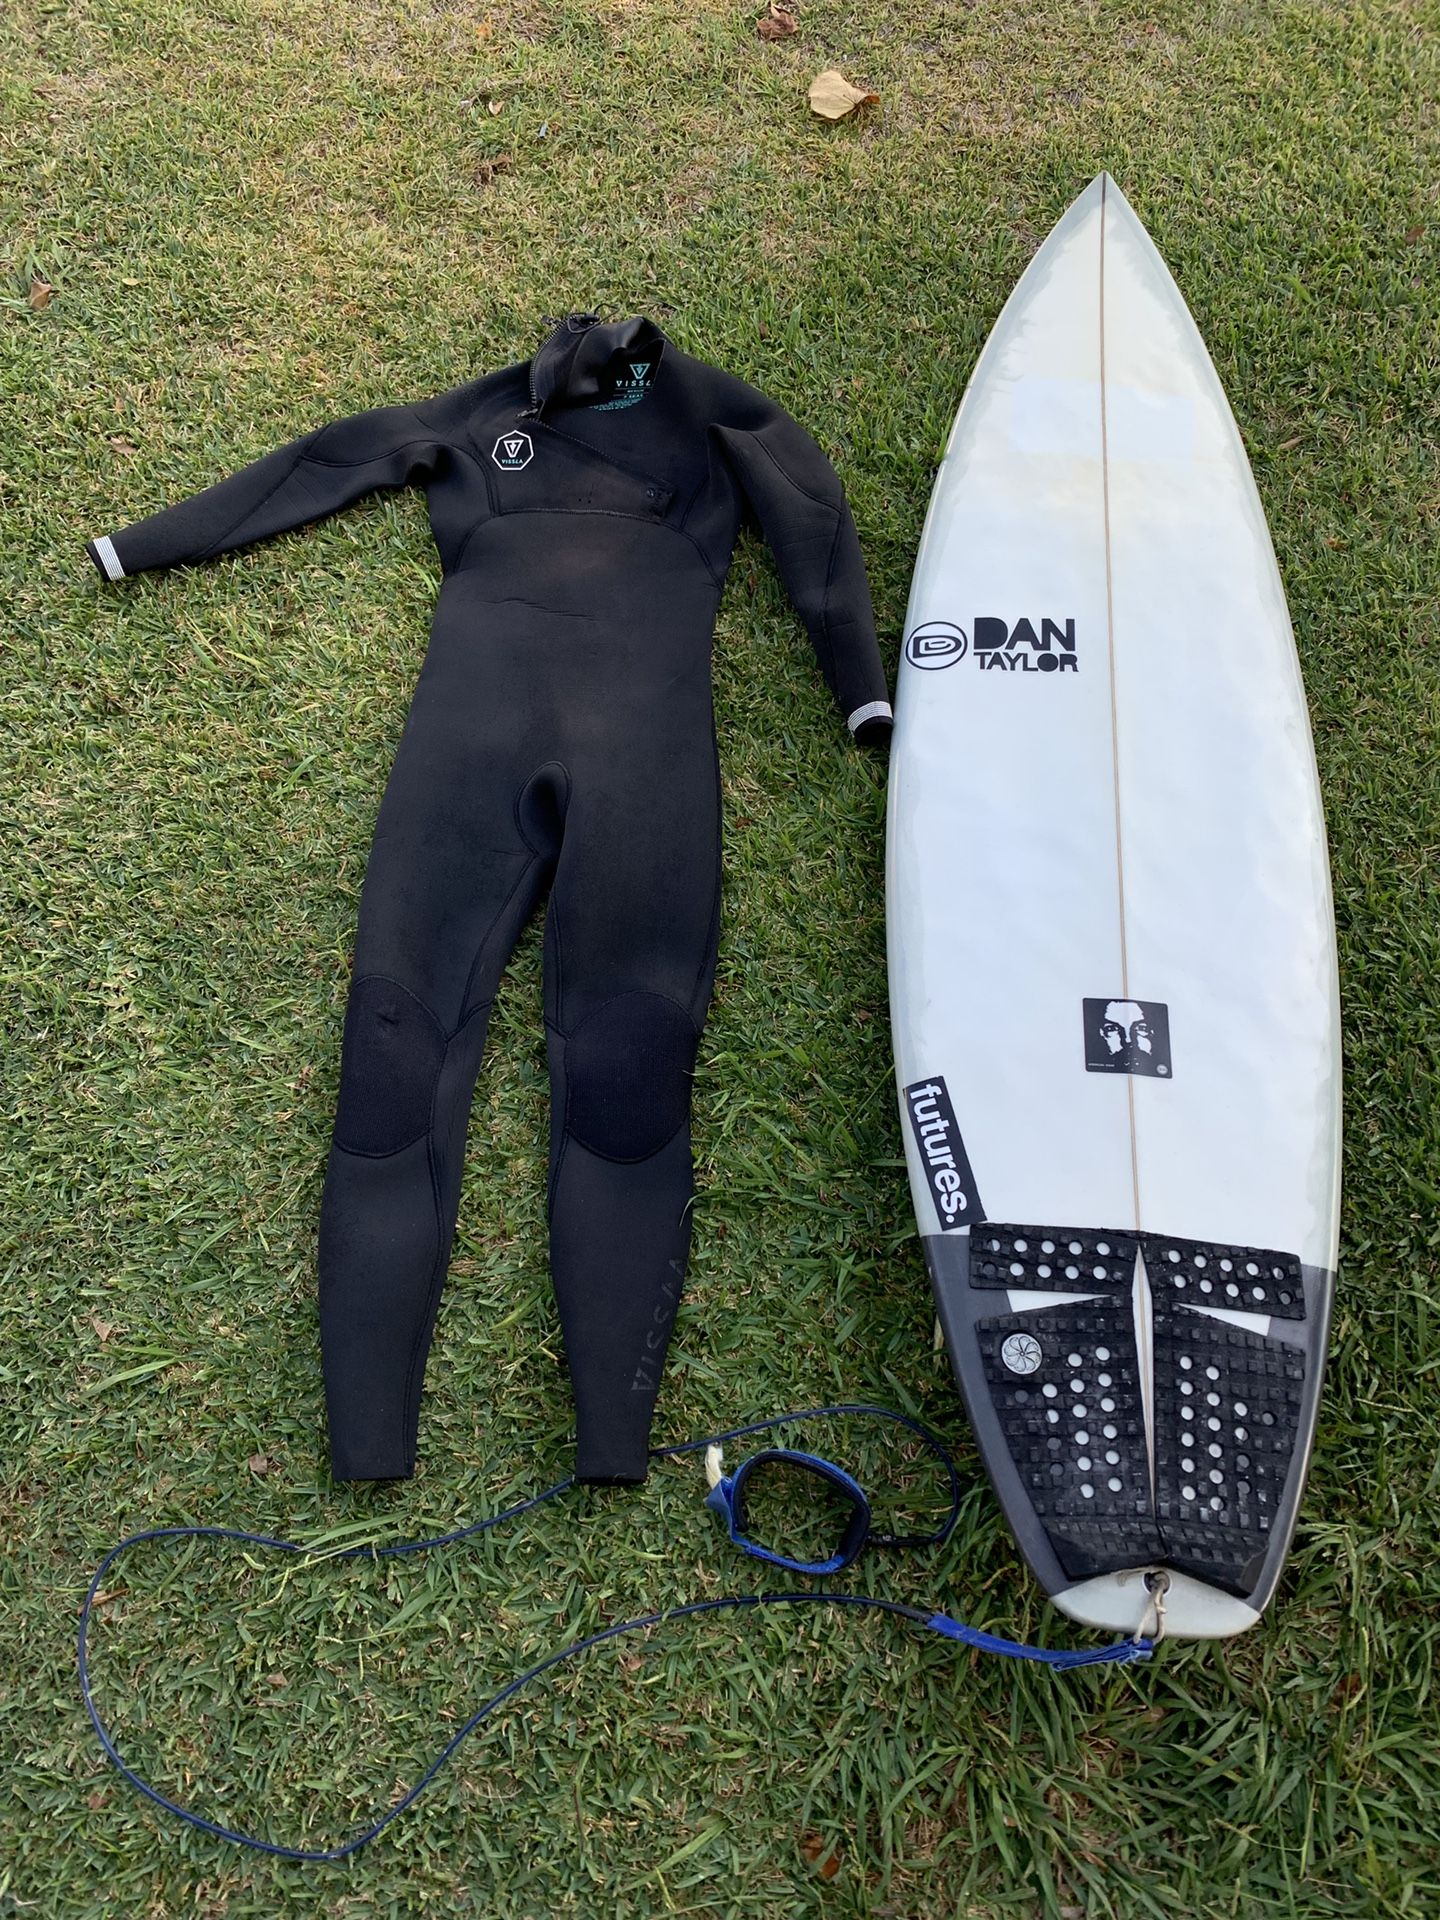 Surfboard 5’9 and 4:3 wetsuit medium